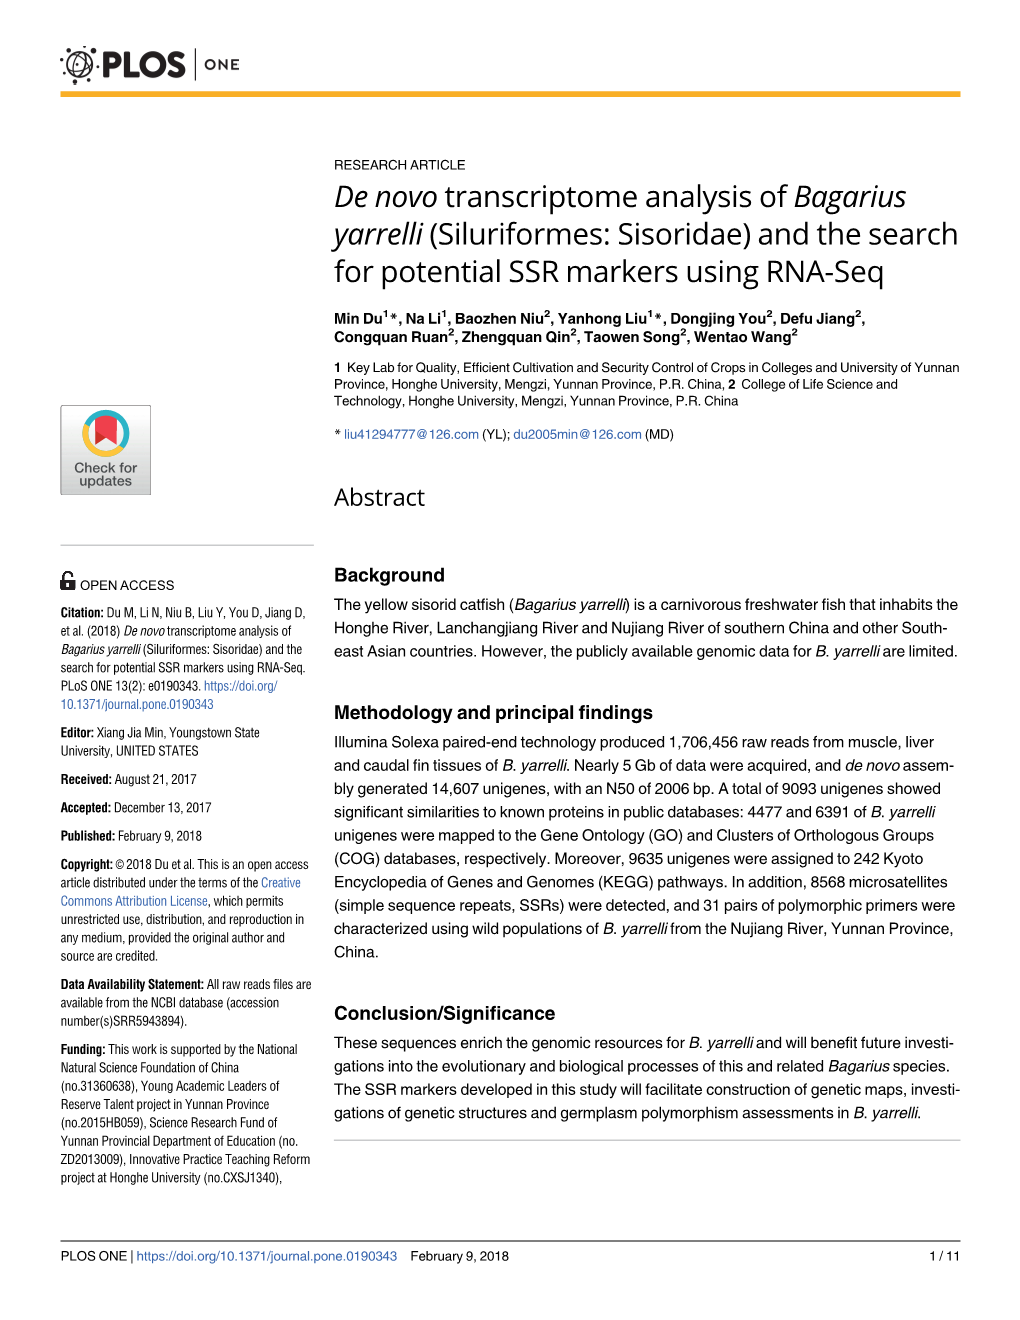 De Novo Transcriptome Analysis of Bagarius Yarrelli (Siluriformes: Sisoridae) and the Search for Potential SSR Markers Using RNA-Seq